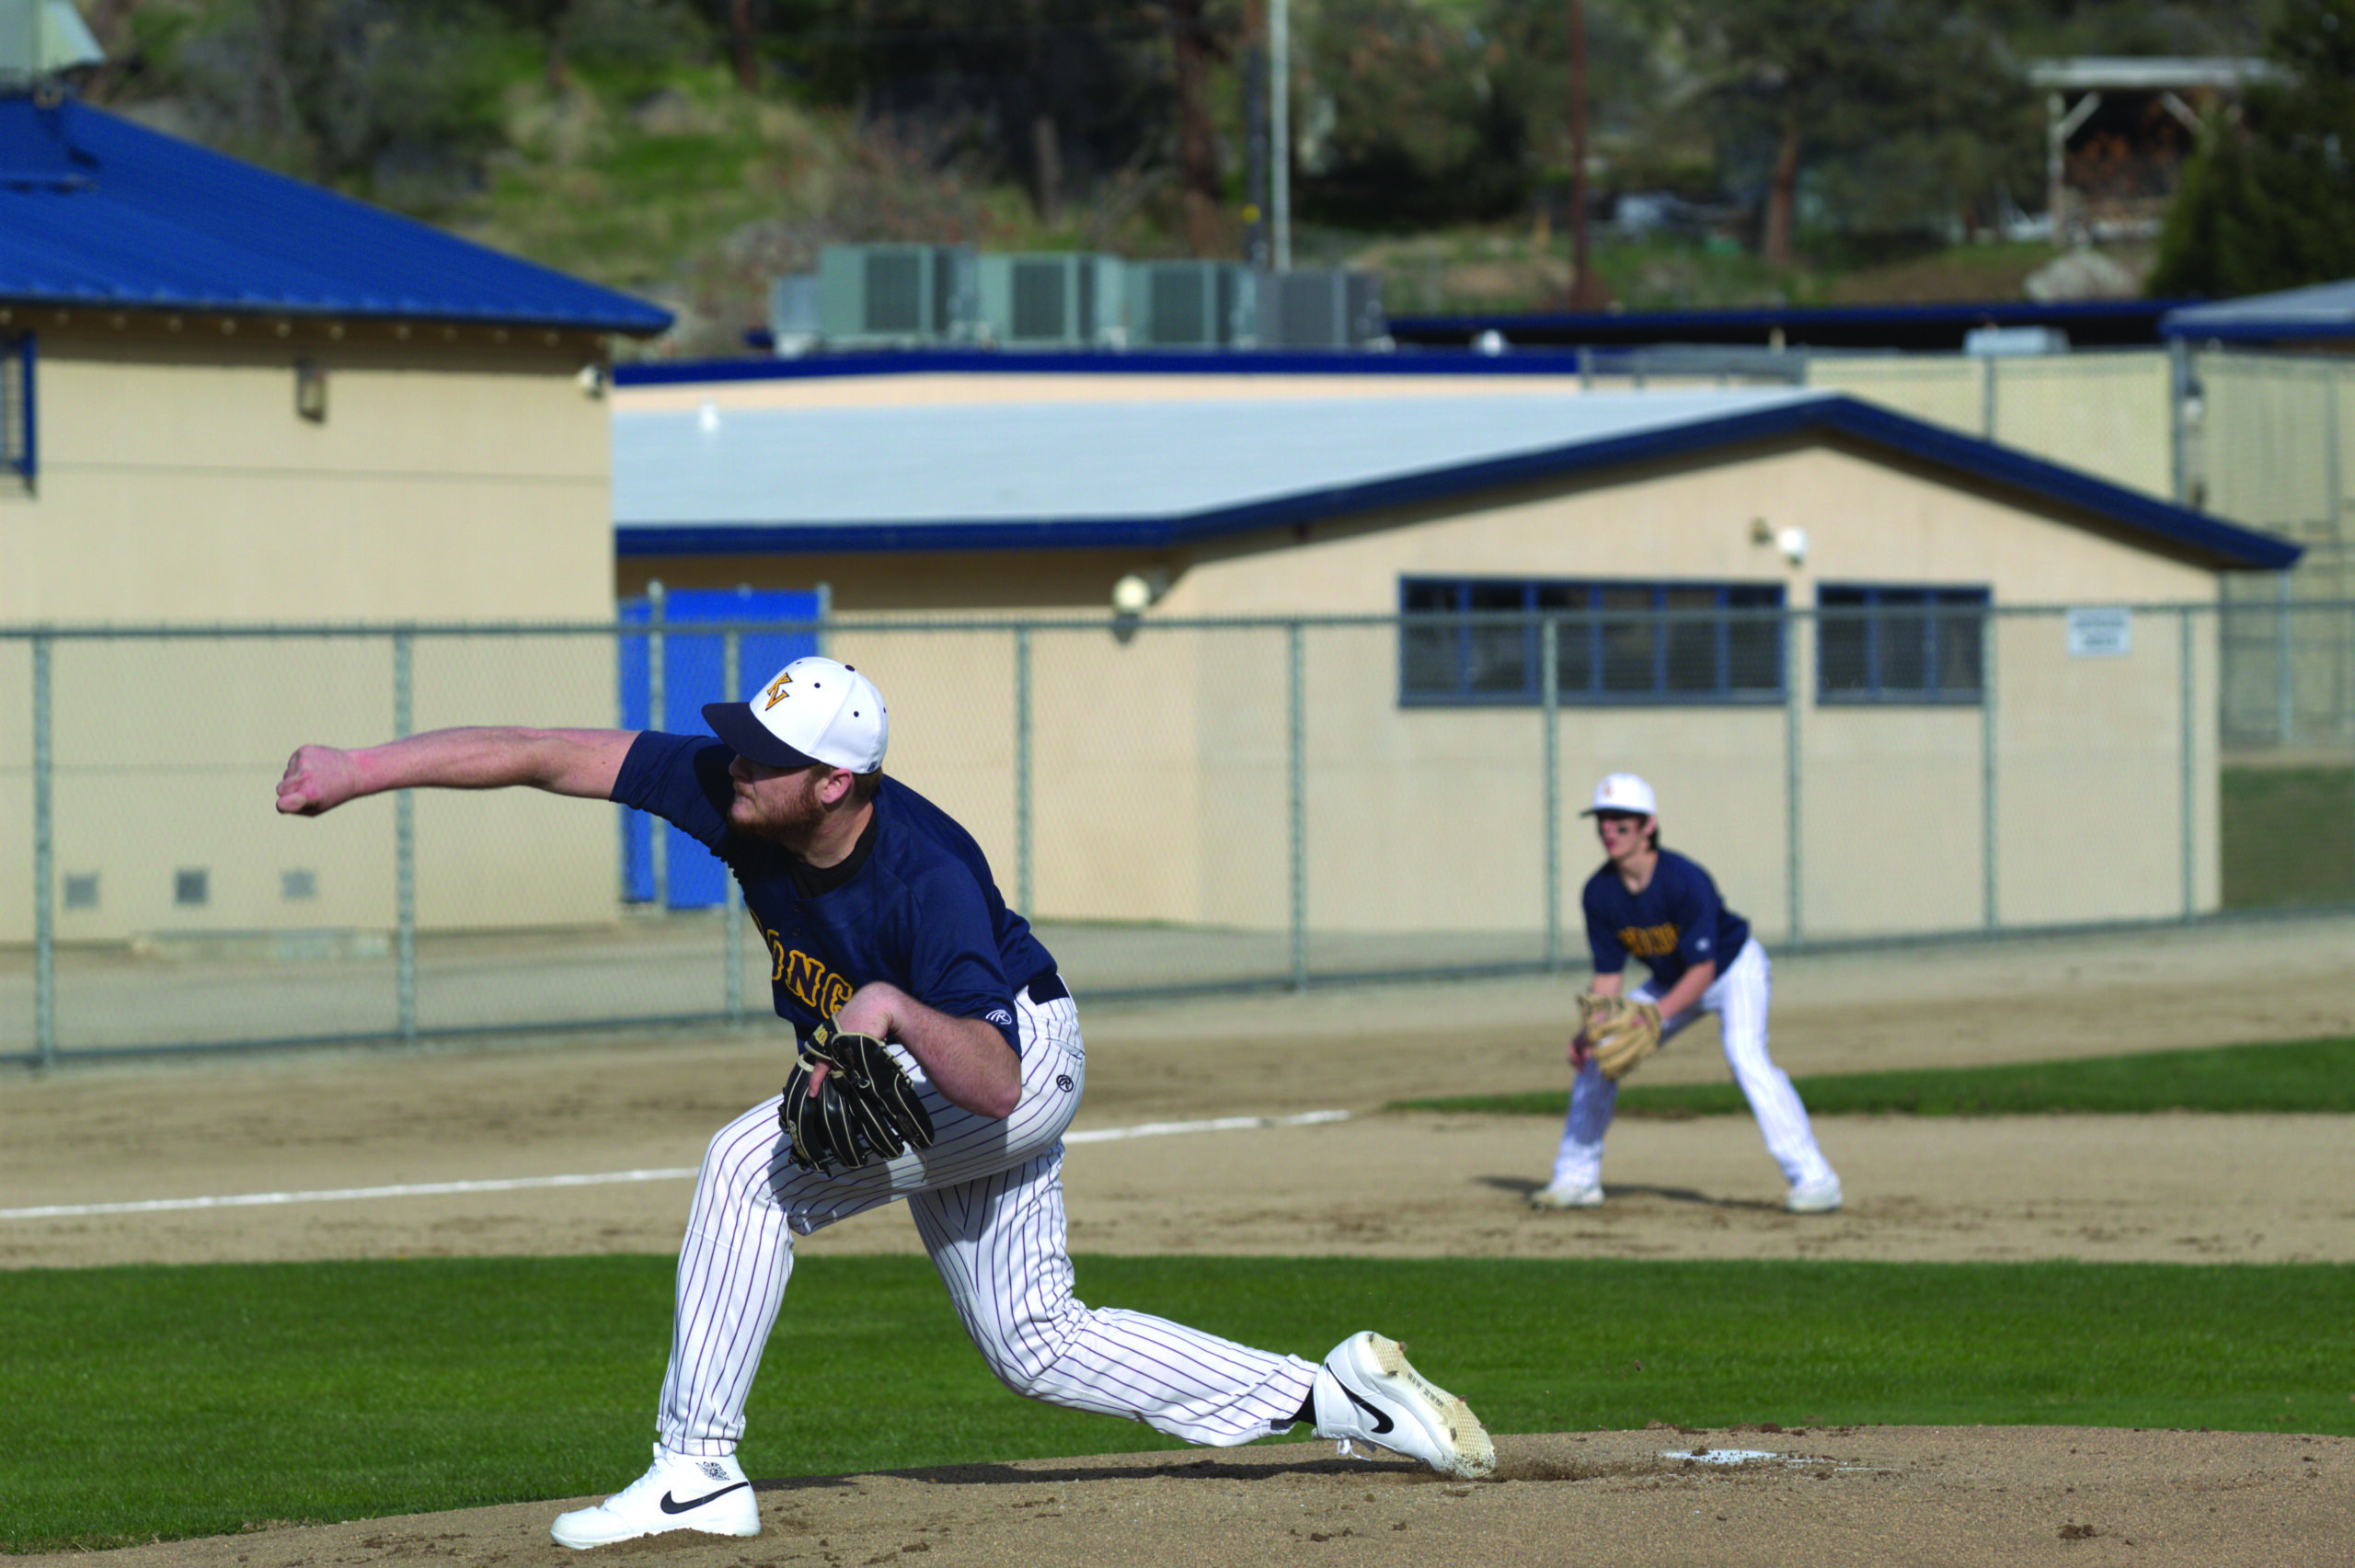 Broncs varsity baseball squad scores 49 runs in sweeping two games to open the season